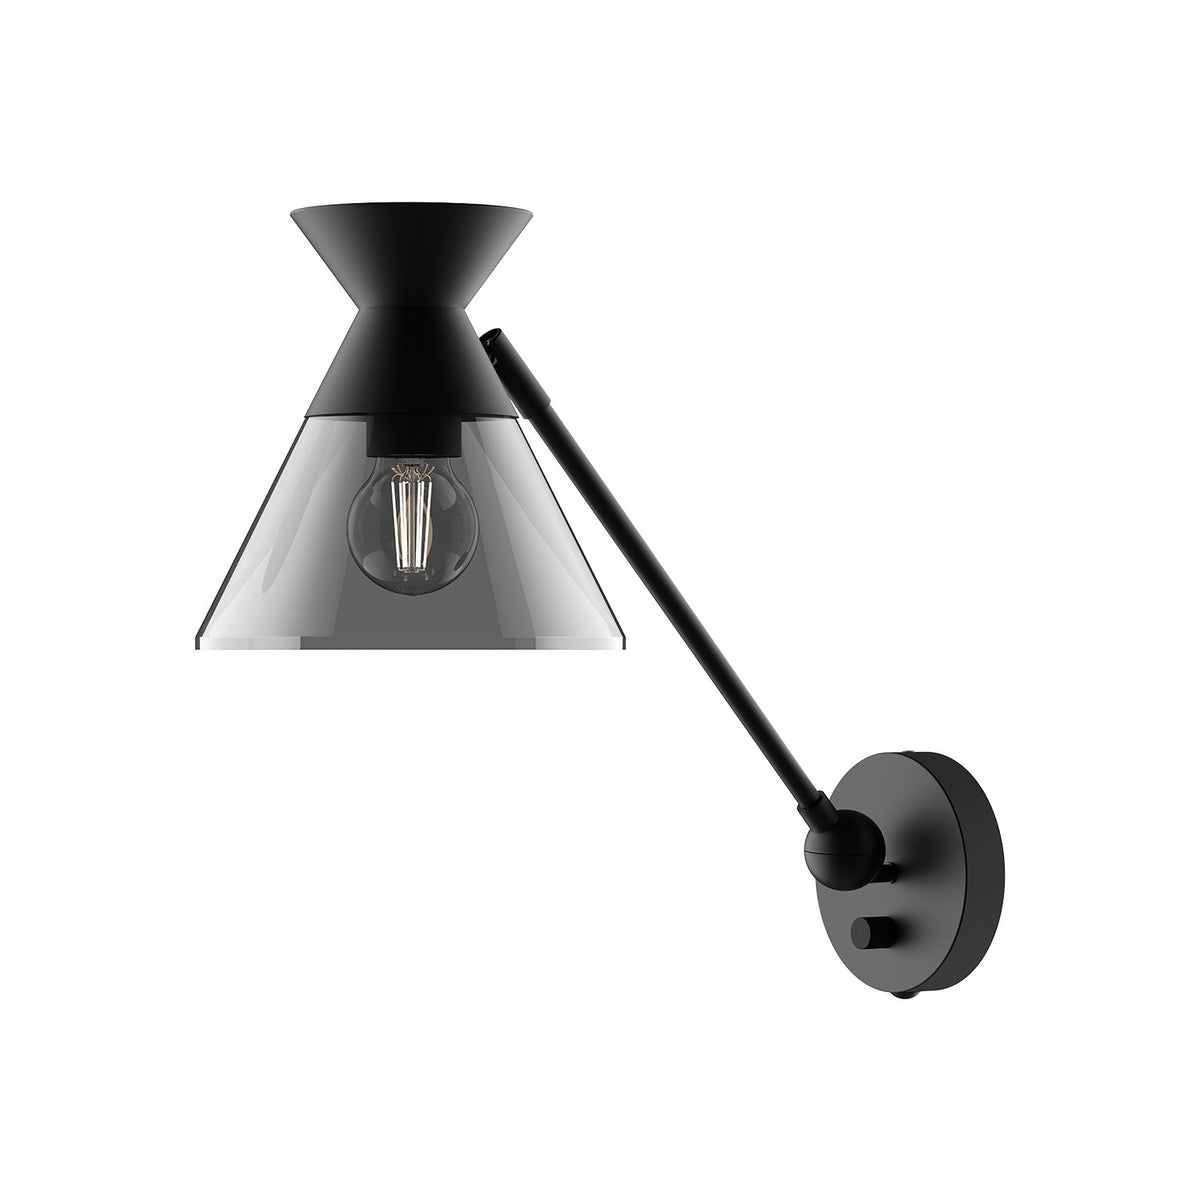 Alora Canada - WV521008MBSM - One Light Wall Sconce - Mauer - Matte Black/Smoked